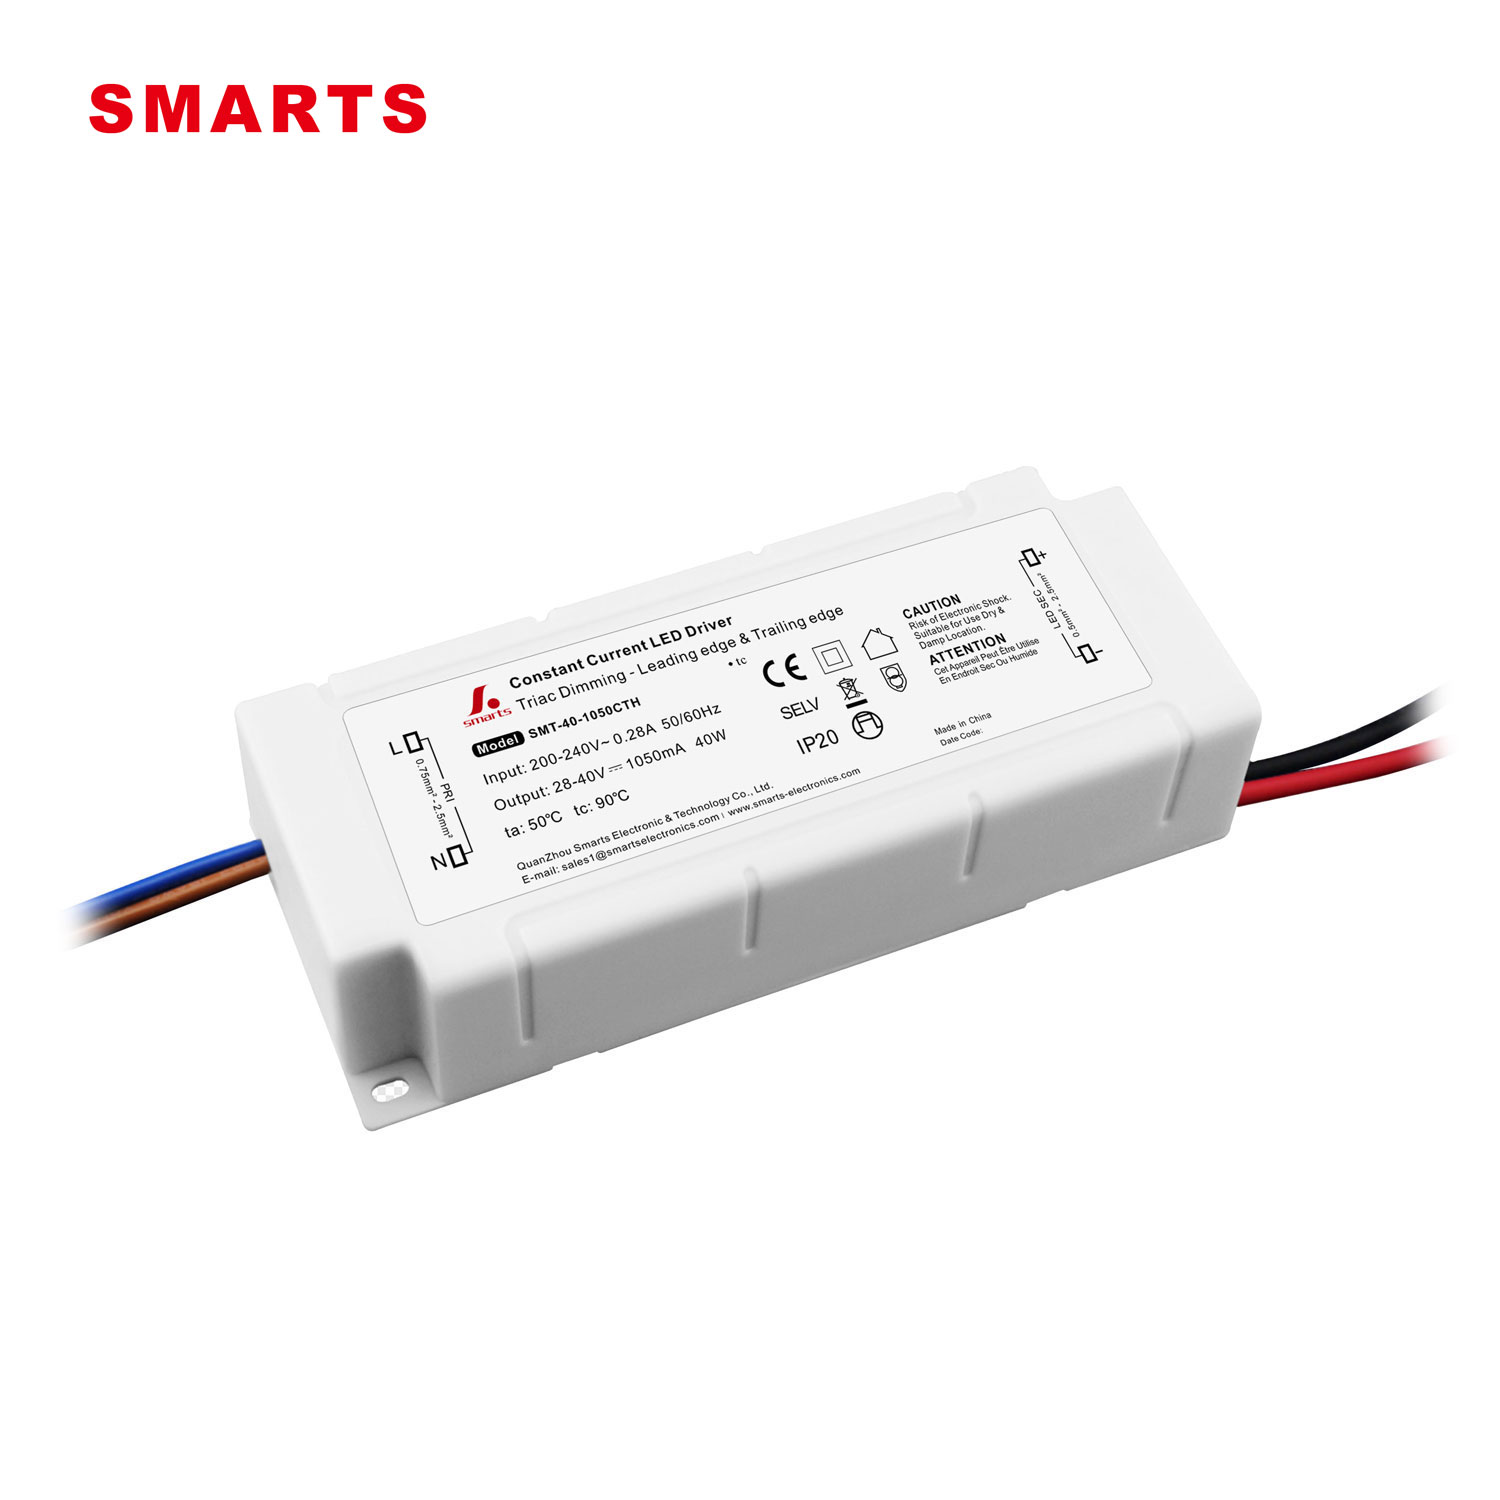 triac dimmer constant current led driver